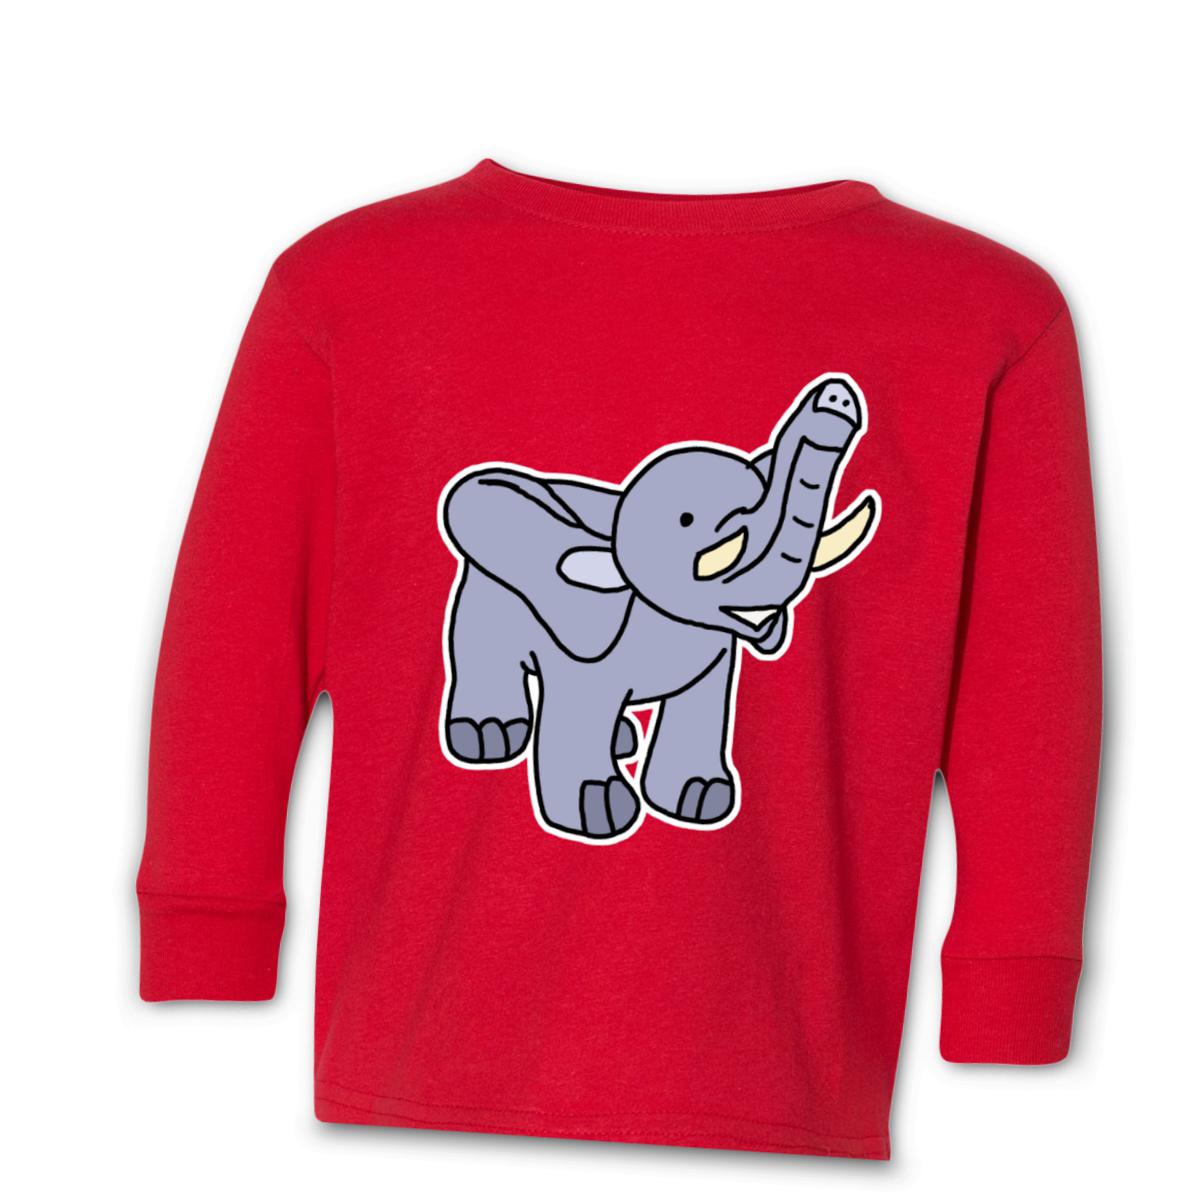 Toy Elephant Kid's Long Sleeve Tee Small red